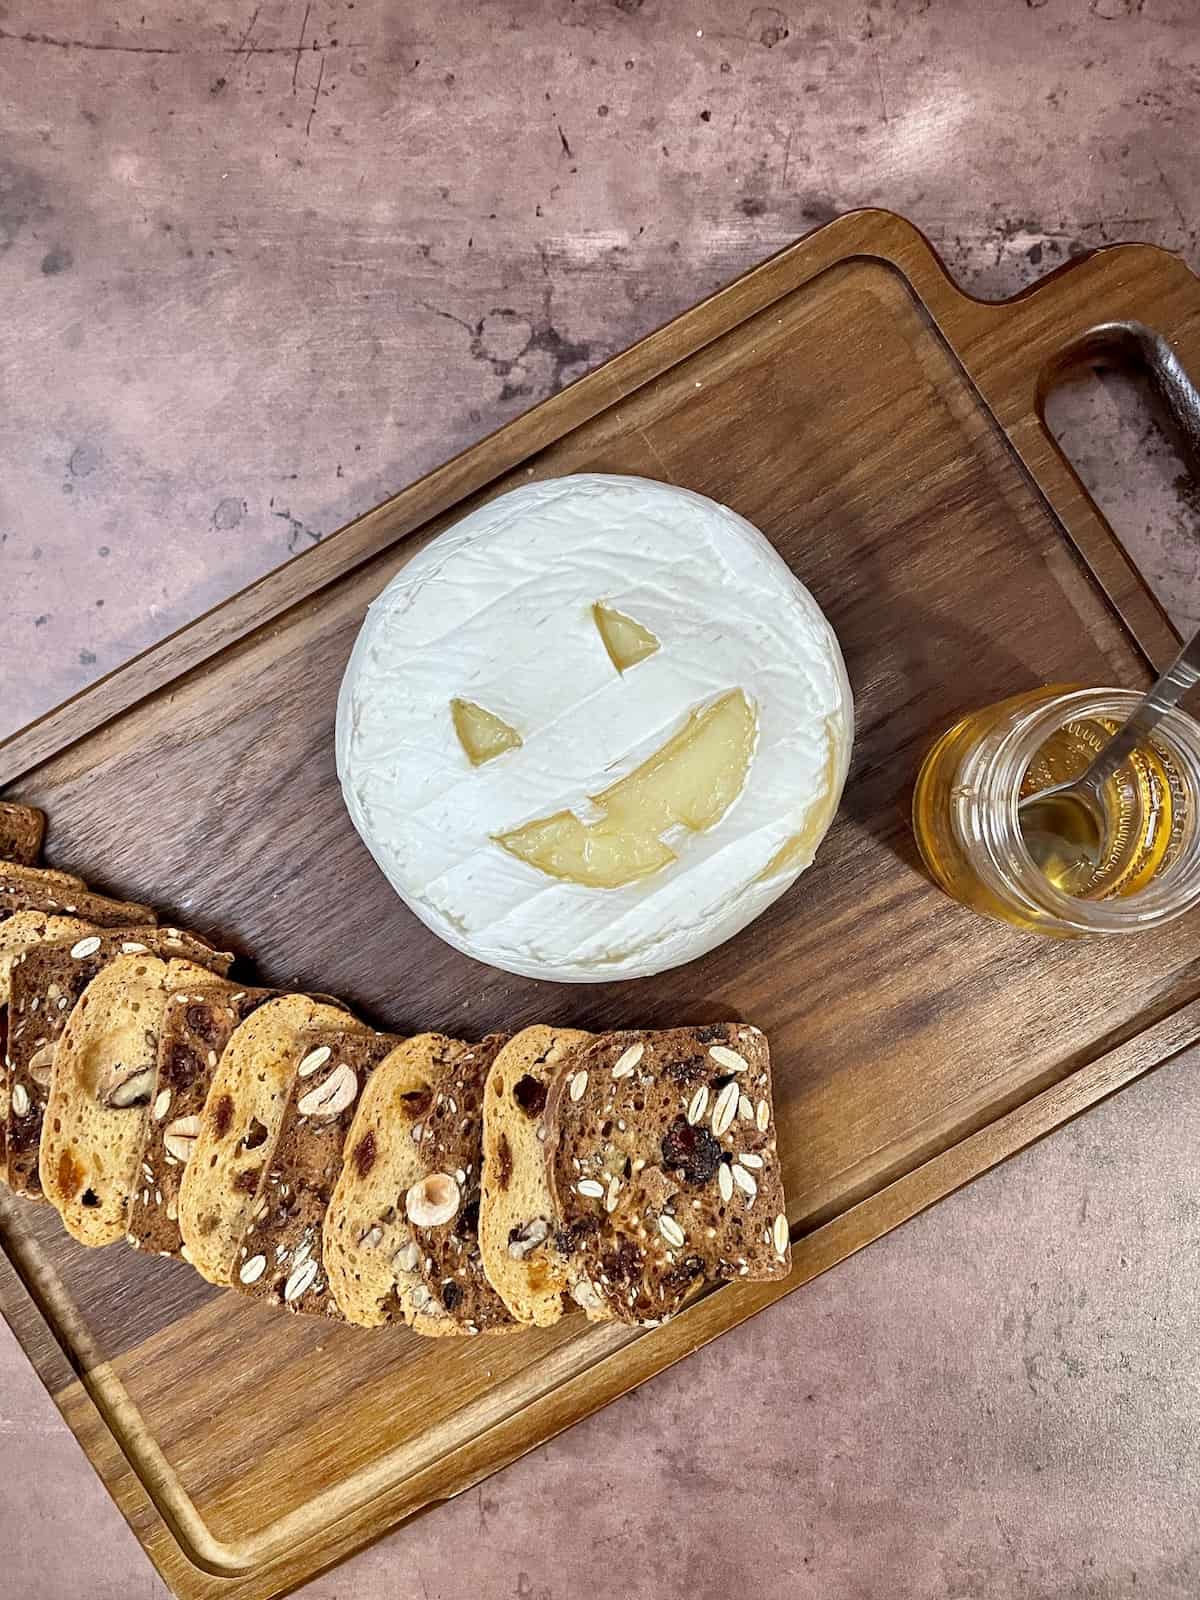 Brie cheese carved like a Jack O'Lantern on a wood board with crackers and honey.